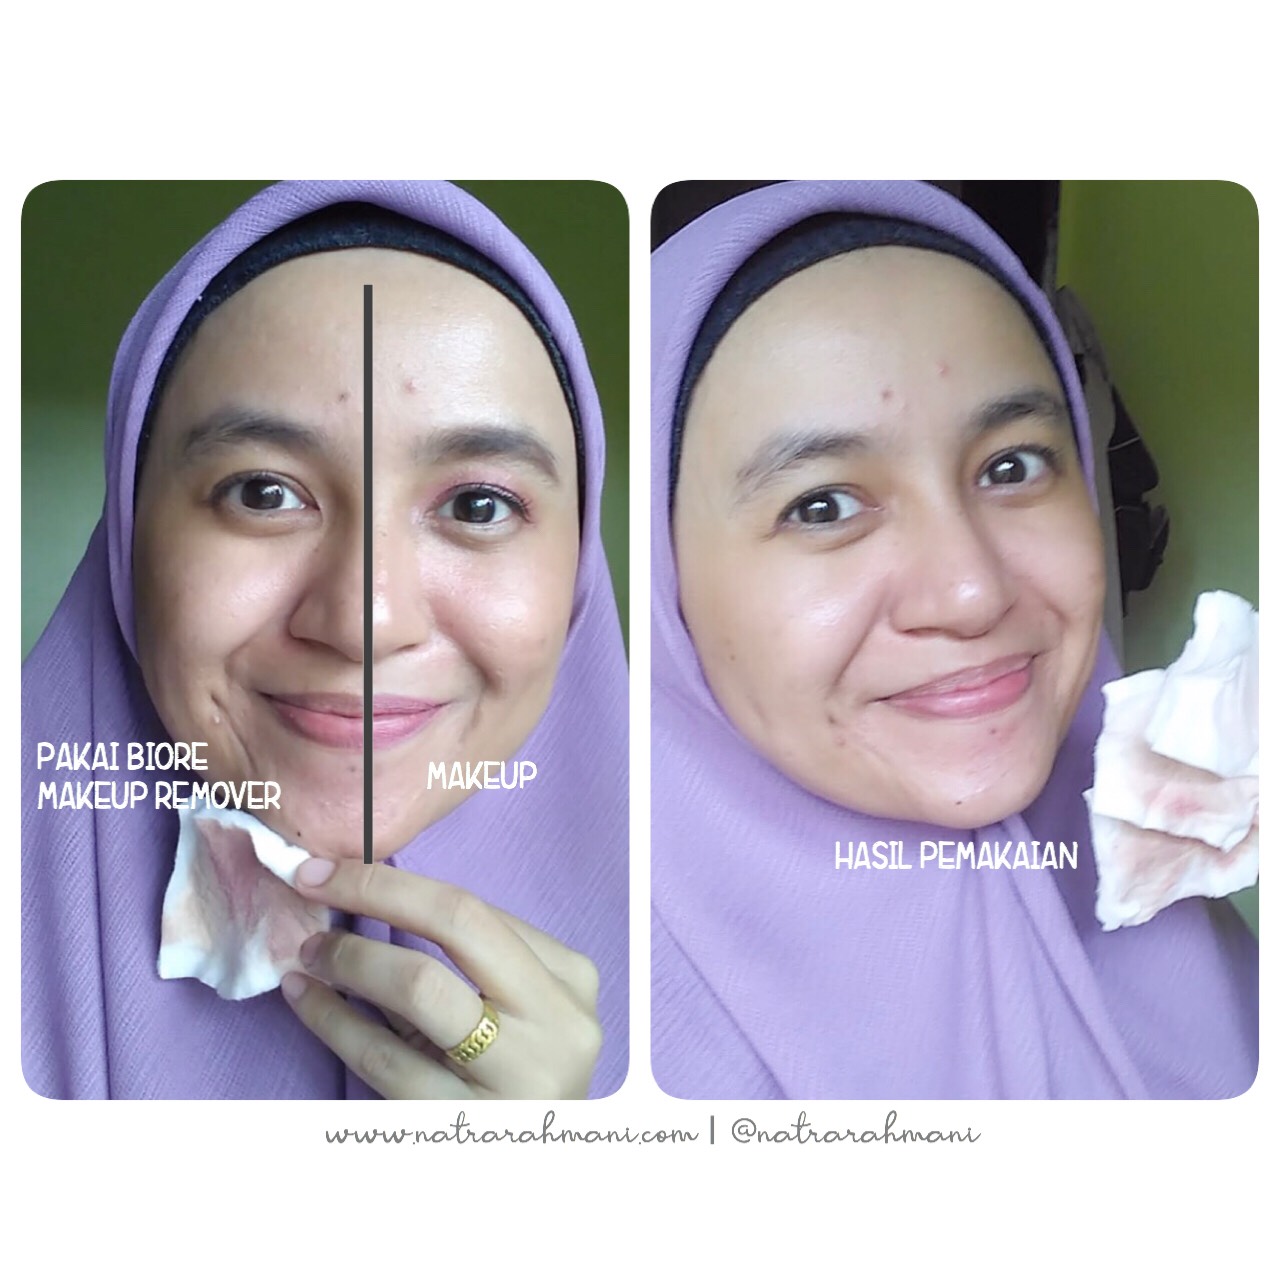 review-biore-perfect-cleansing-water-soften-up-natrarahmani